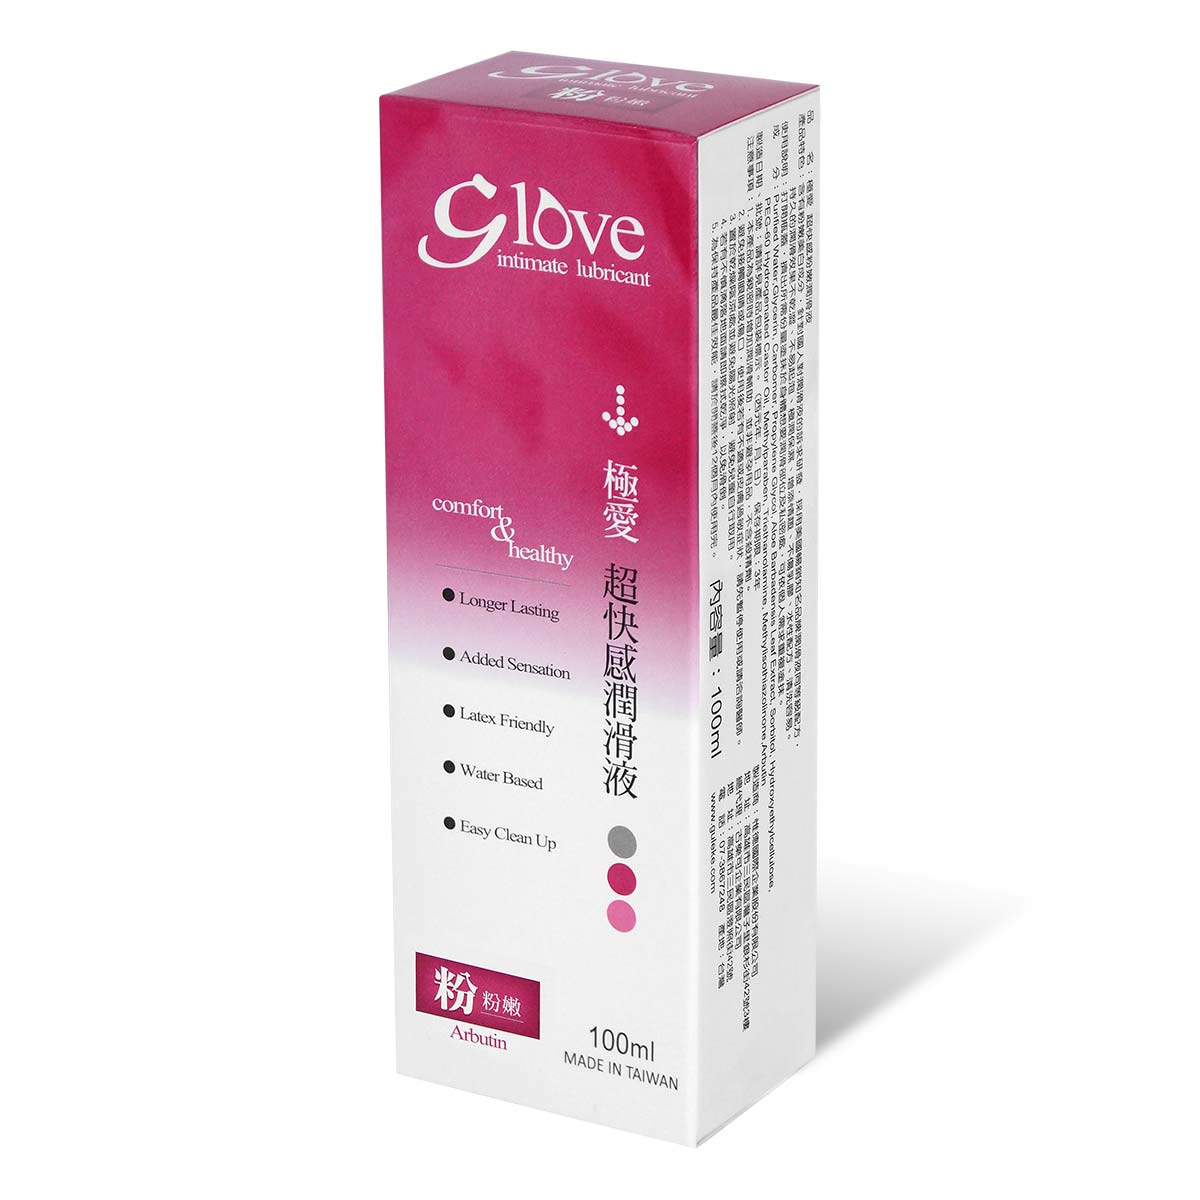 G Love intimate lubricant [Arbutin] 100ml Water-based Lubricant-p_1